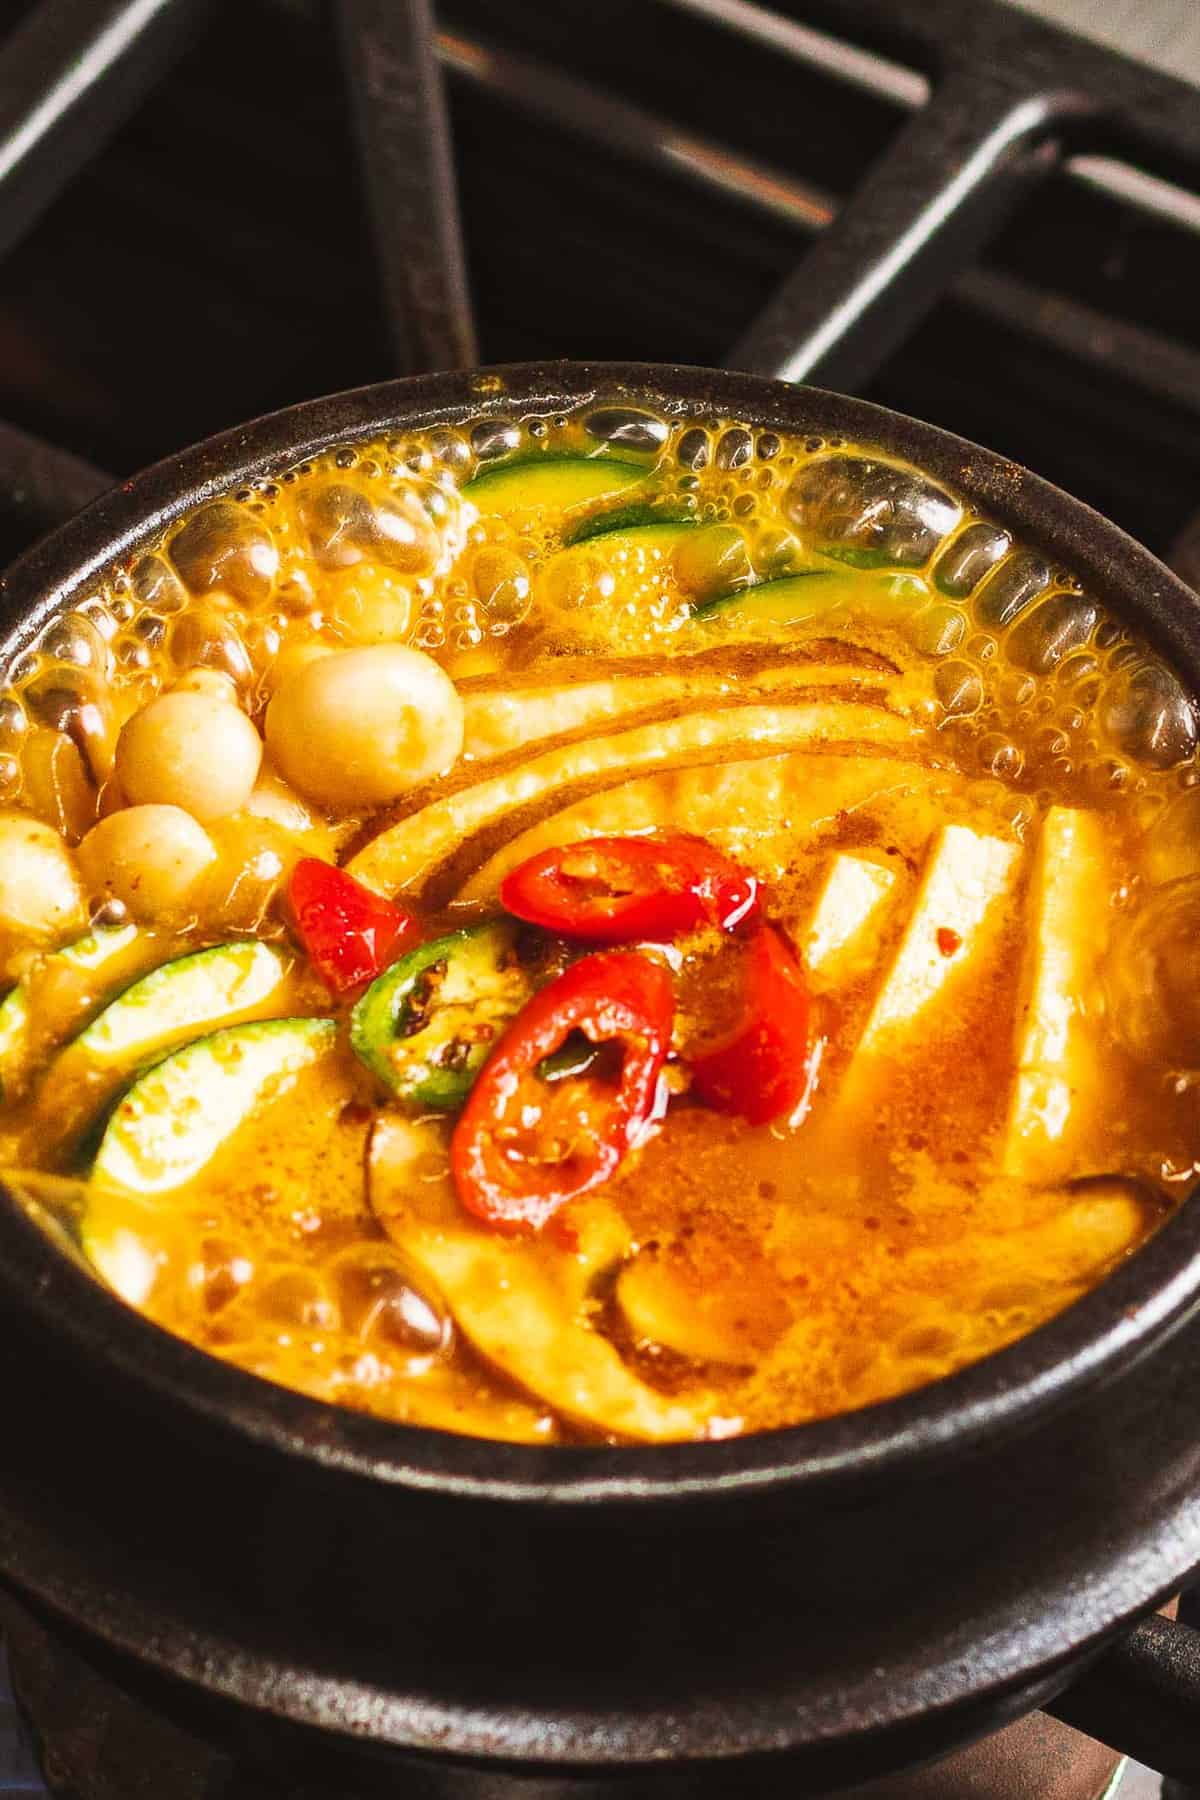 Doenjang jjigae with Korean soybean paste, vegetables, tofu, and peppers boiling in a pot.